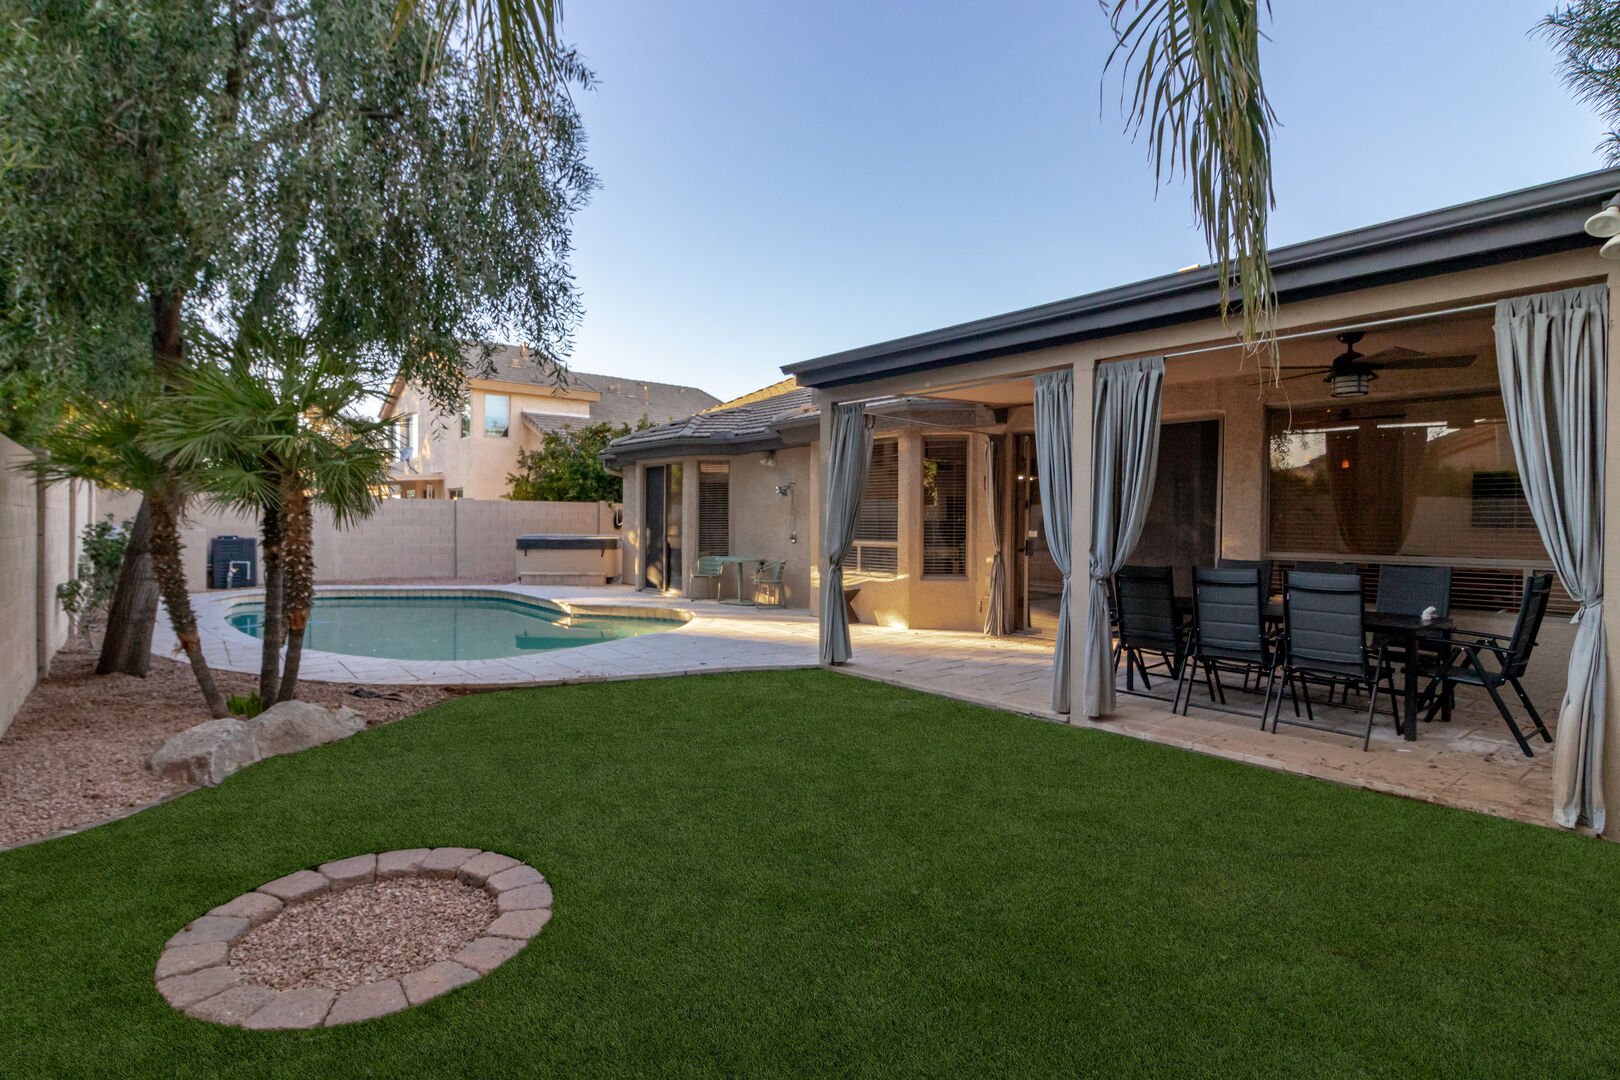 One of our many vacation home rentals in Scottsdale available for a spring vacation.